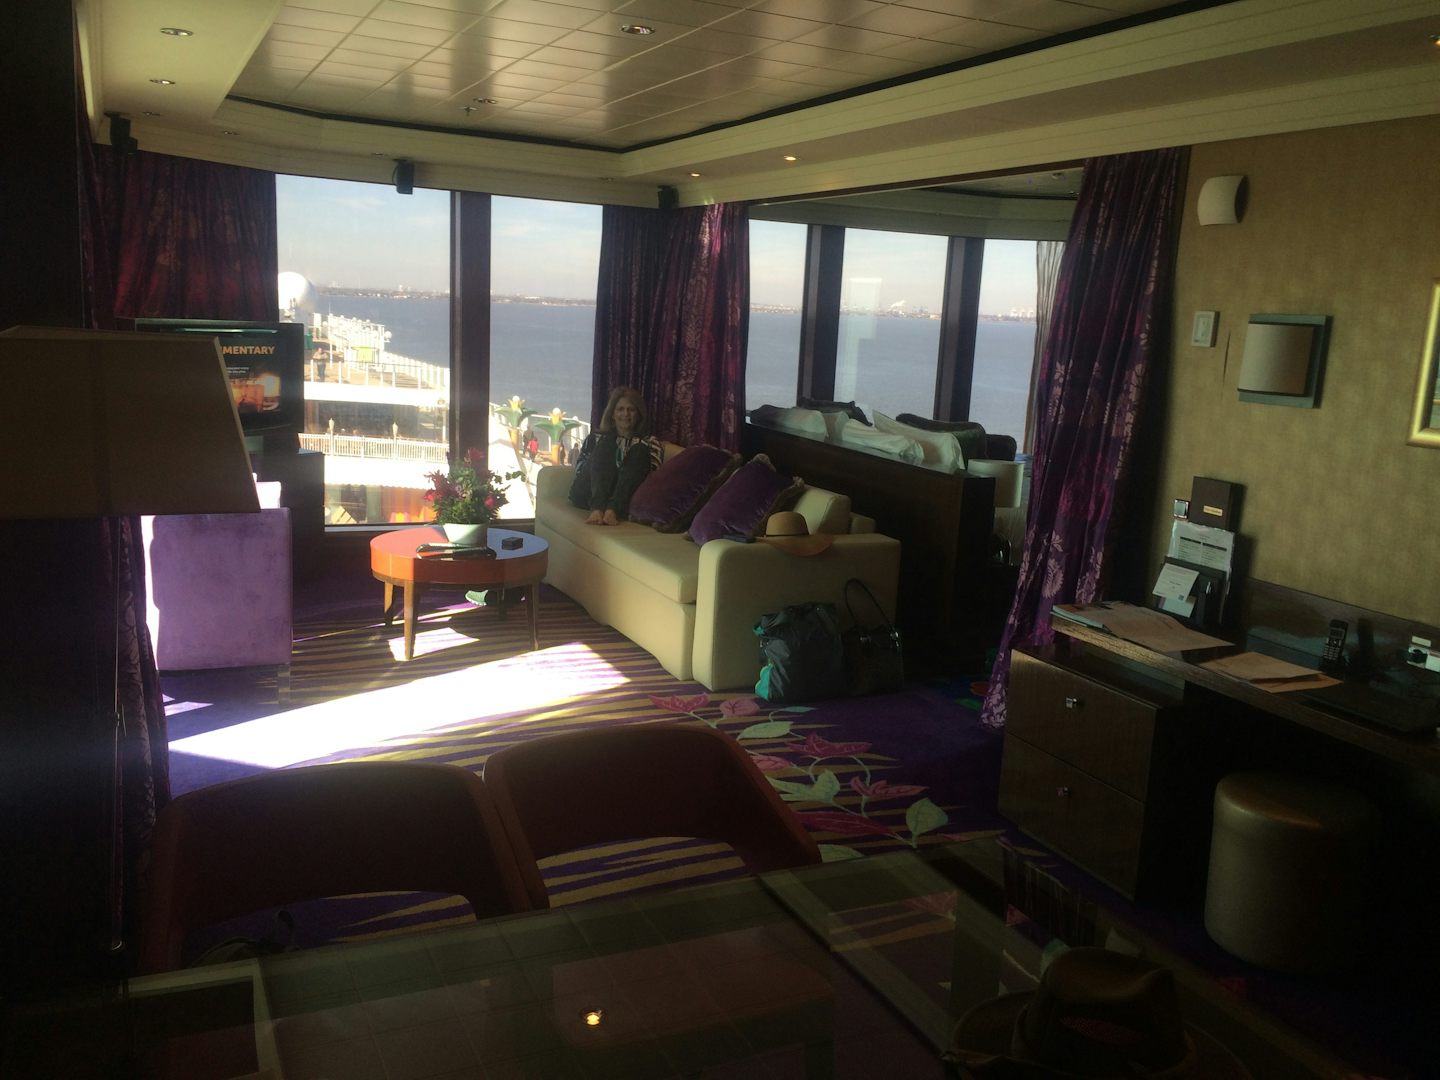 This is the living area of our stateroom